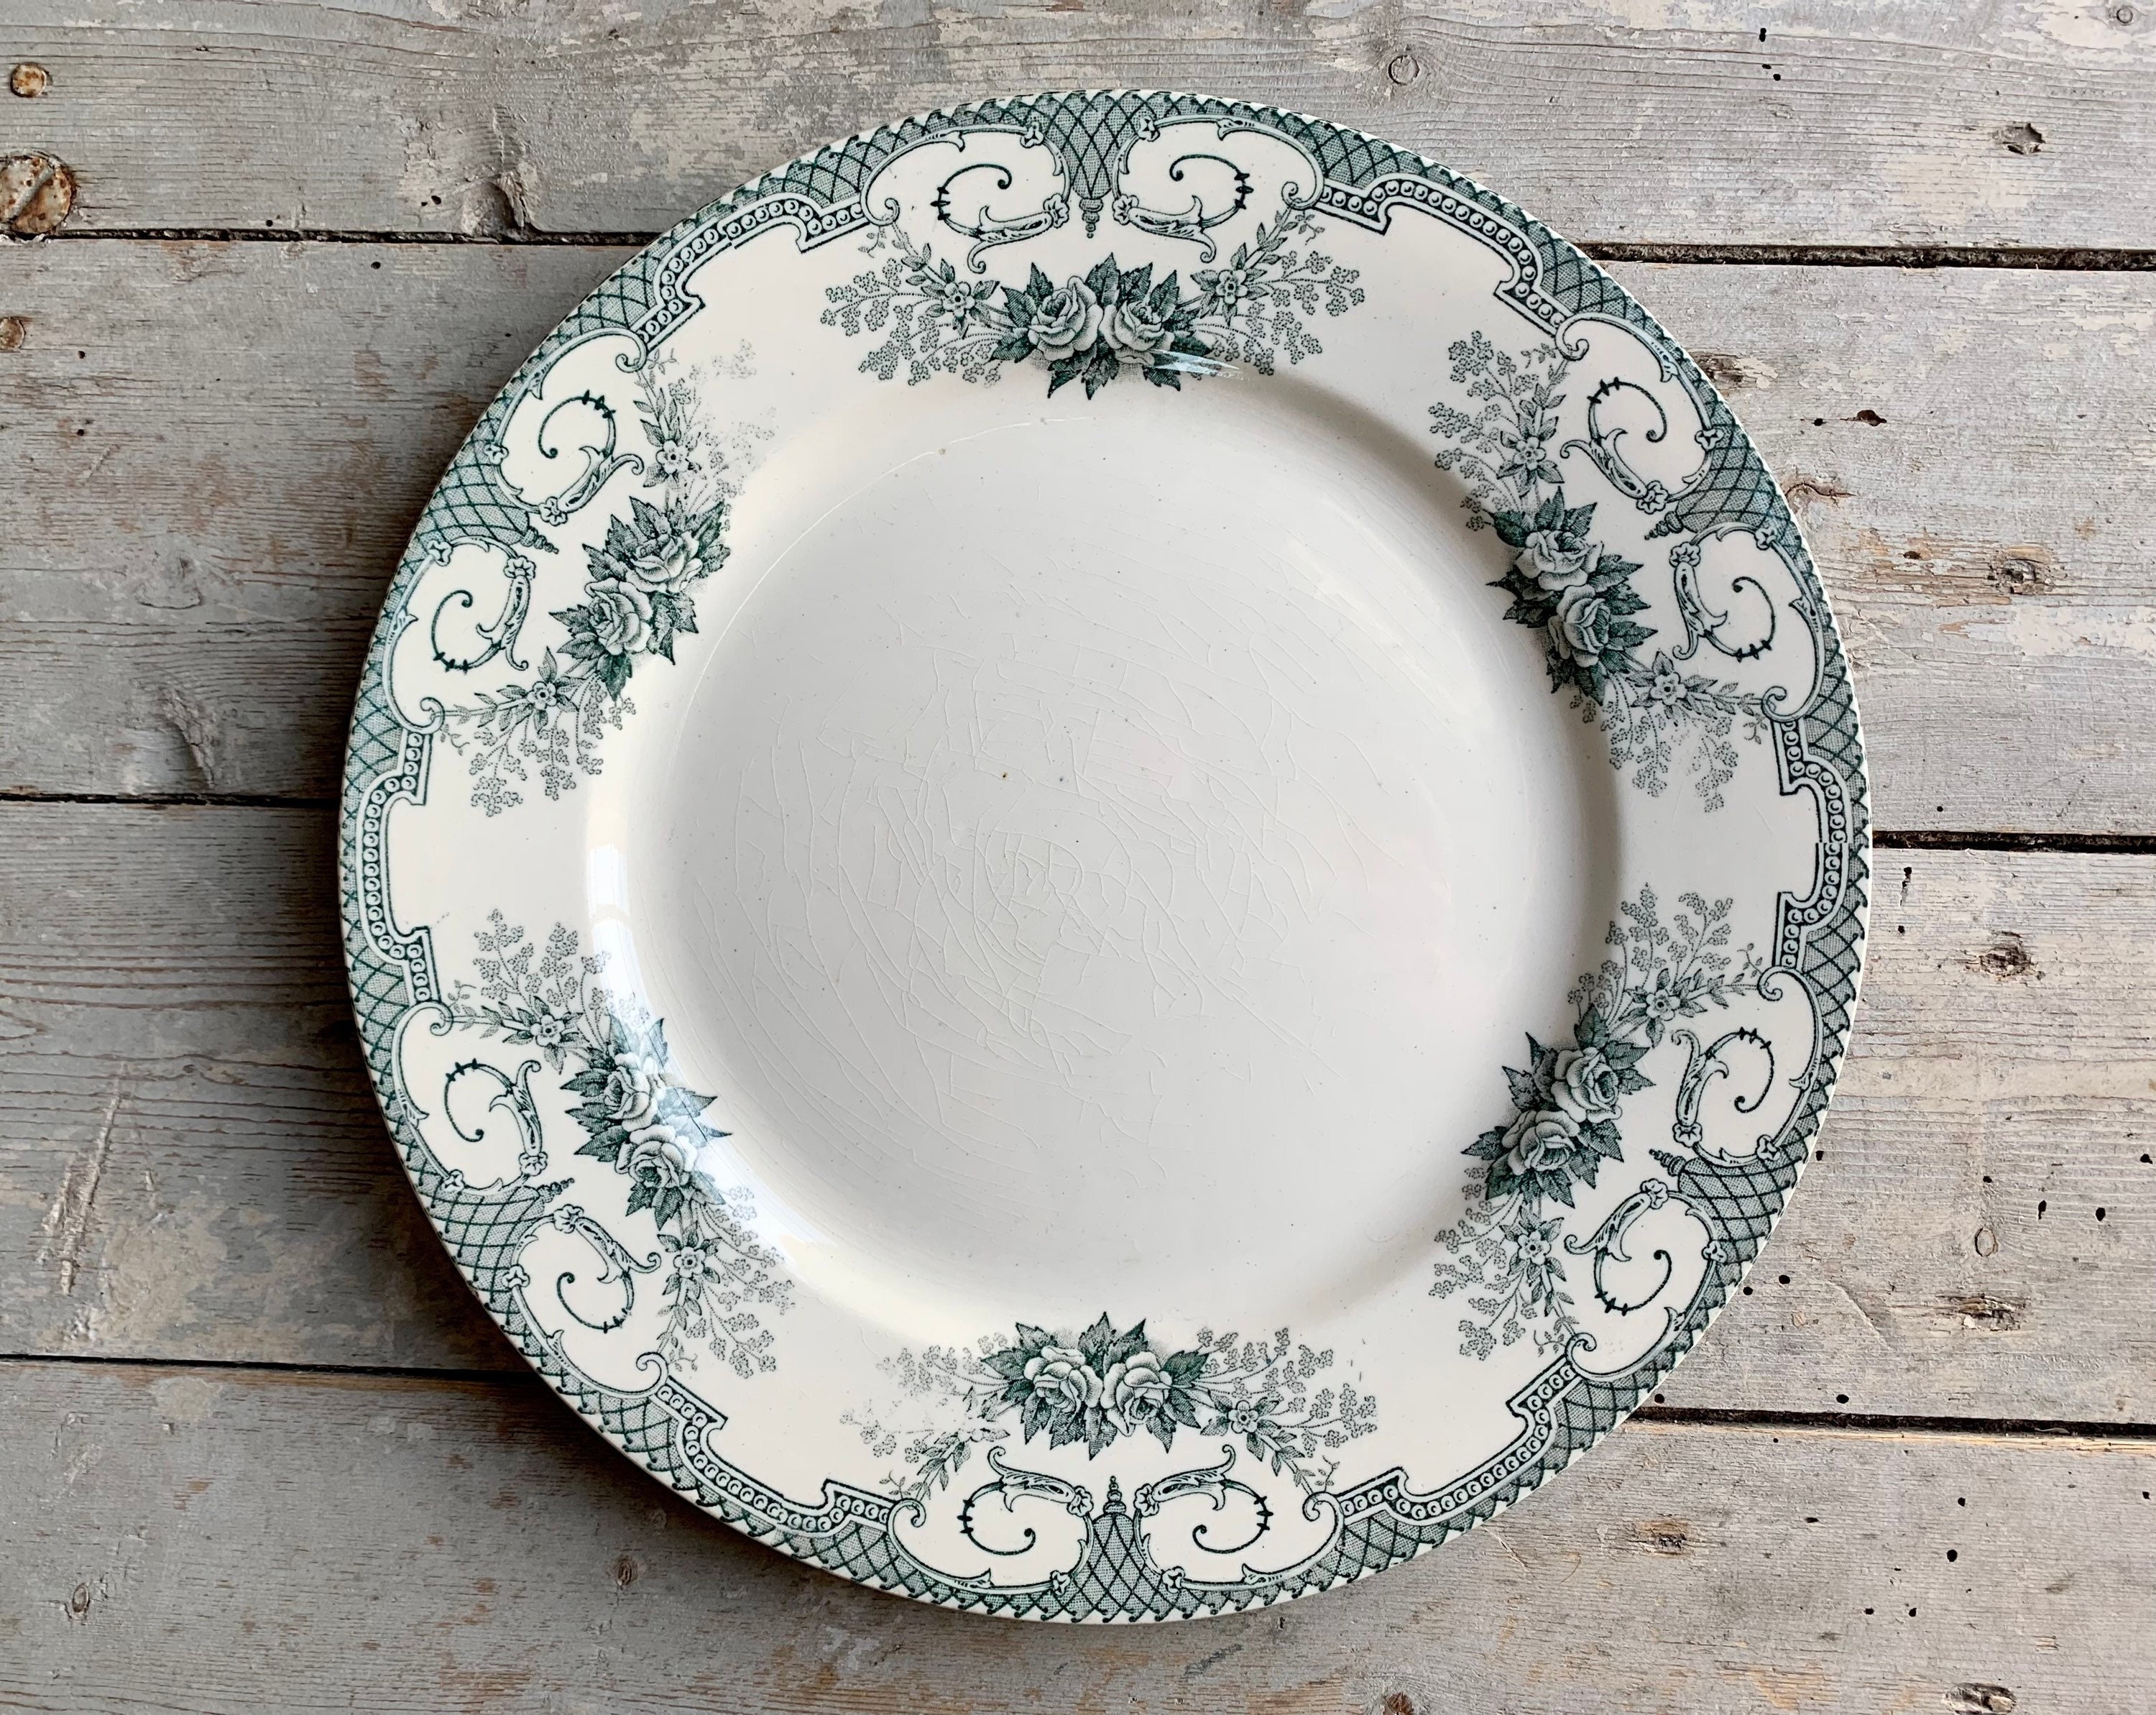 1900S ~ Ironstone Terre de Fer Dinner Plate French Antique Made in France By Les Ets. Debray Model C